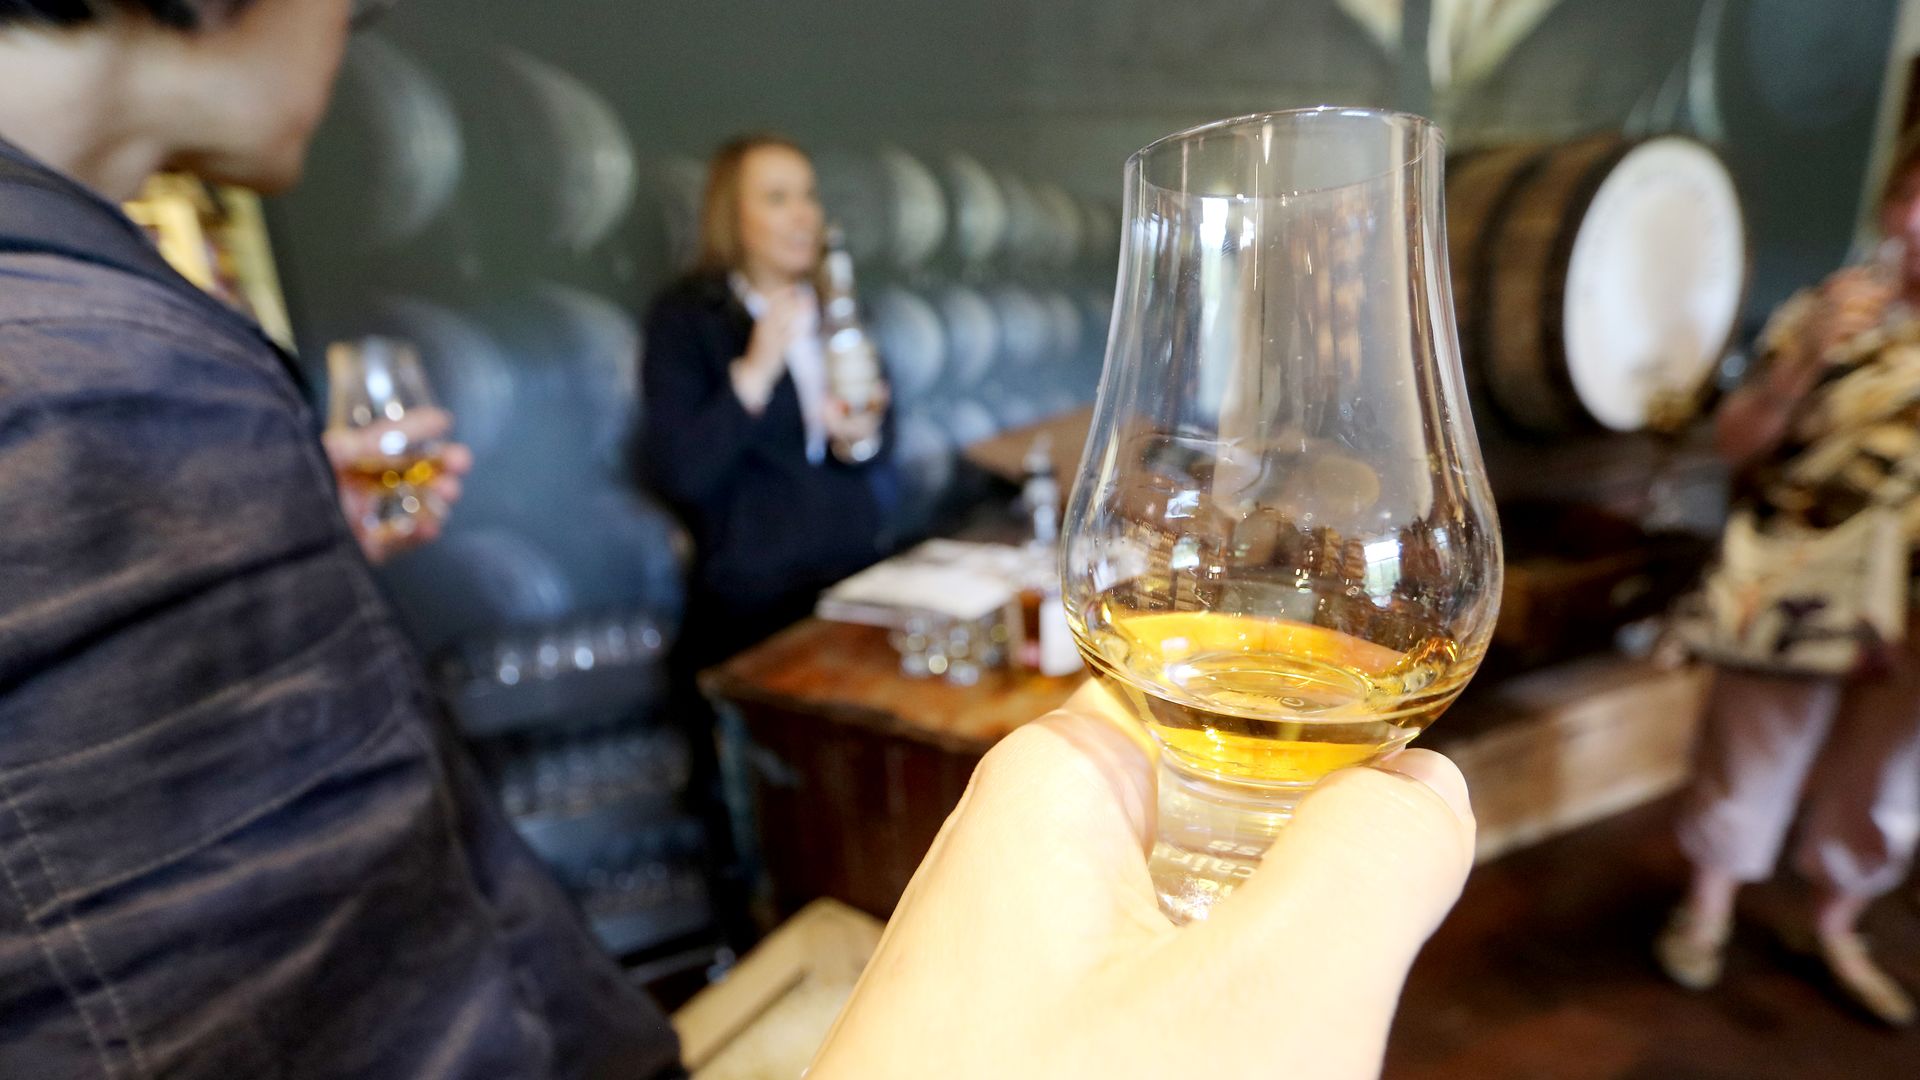 Deanston whisky distillery tour and tasting, Scotland